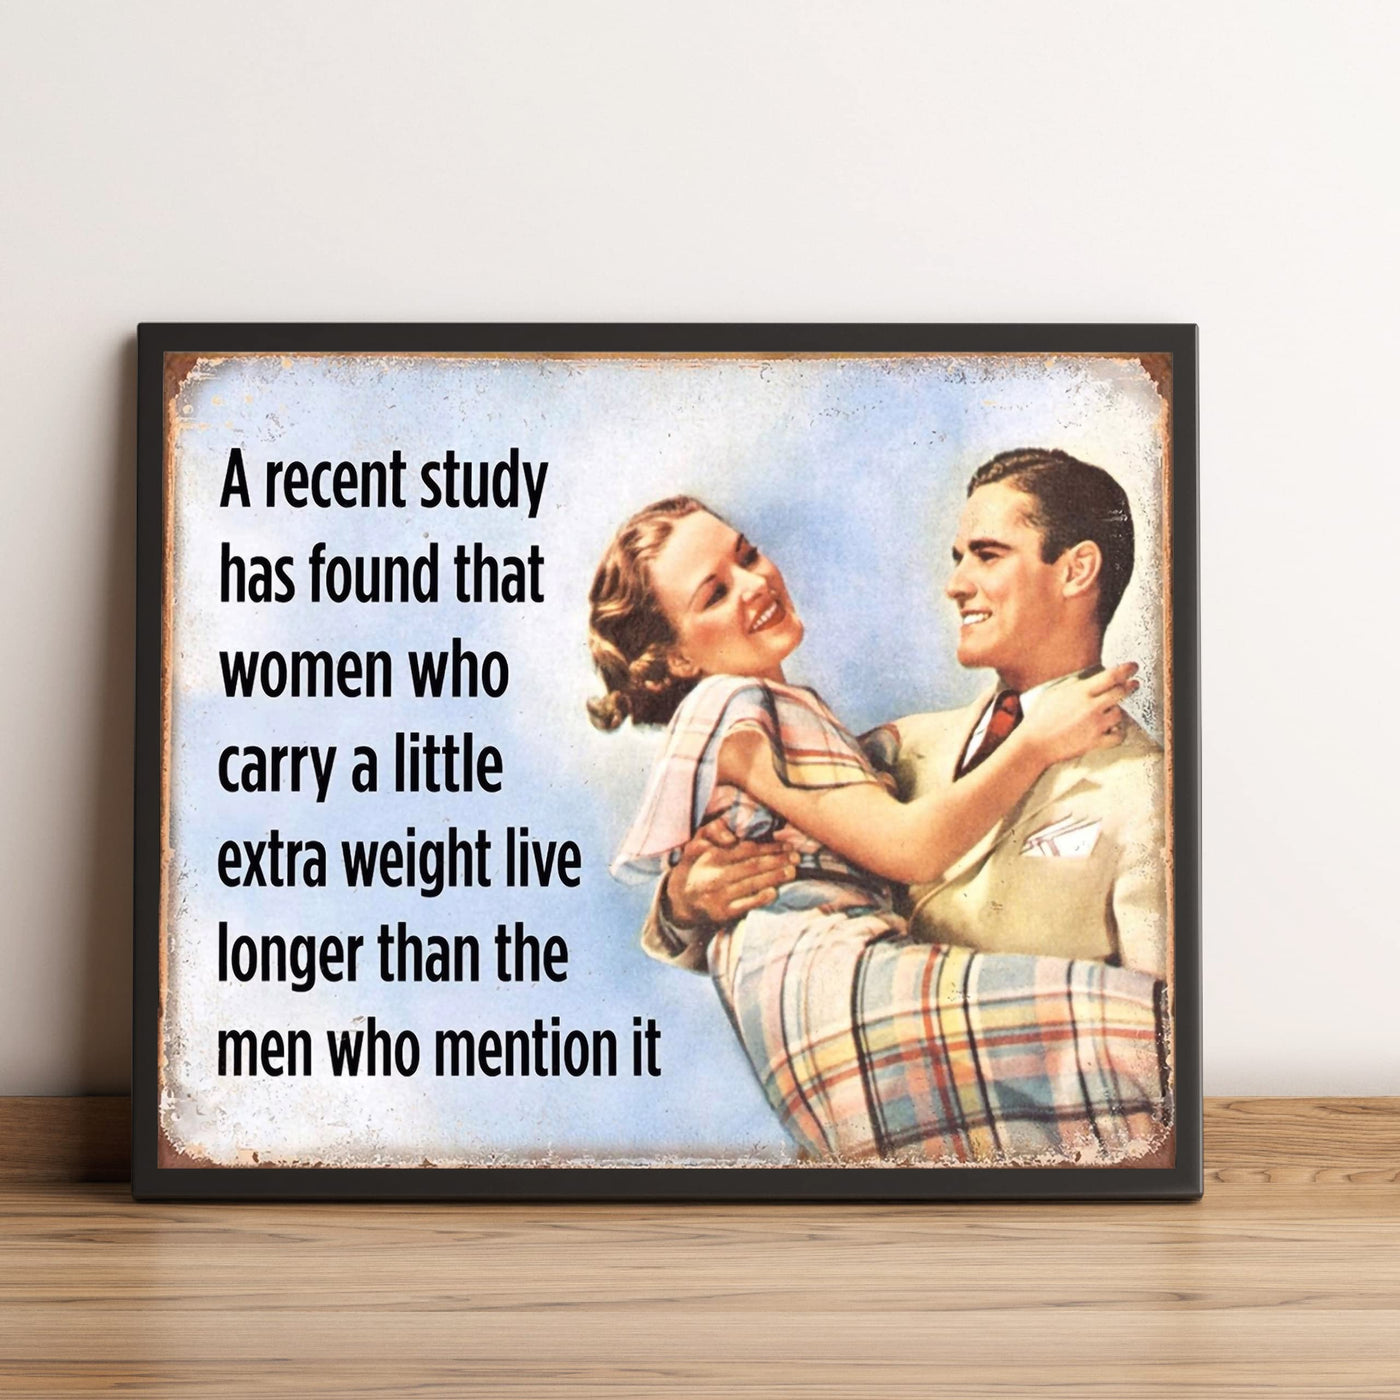 Women Who Carry Extra Weight Live Longer Funny Retro Wall Sign -10 x 8" Sarcastic Art Print -Ready to Frame. Humorous Home-Office-Bar-Shop-Man Cave Decor. Fun Novelty Gift! Printed on Photo Paper.